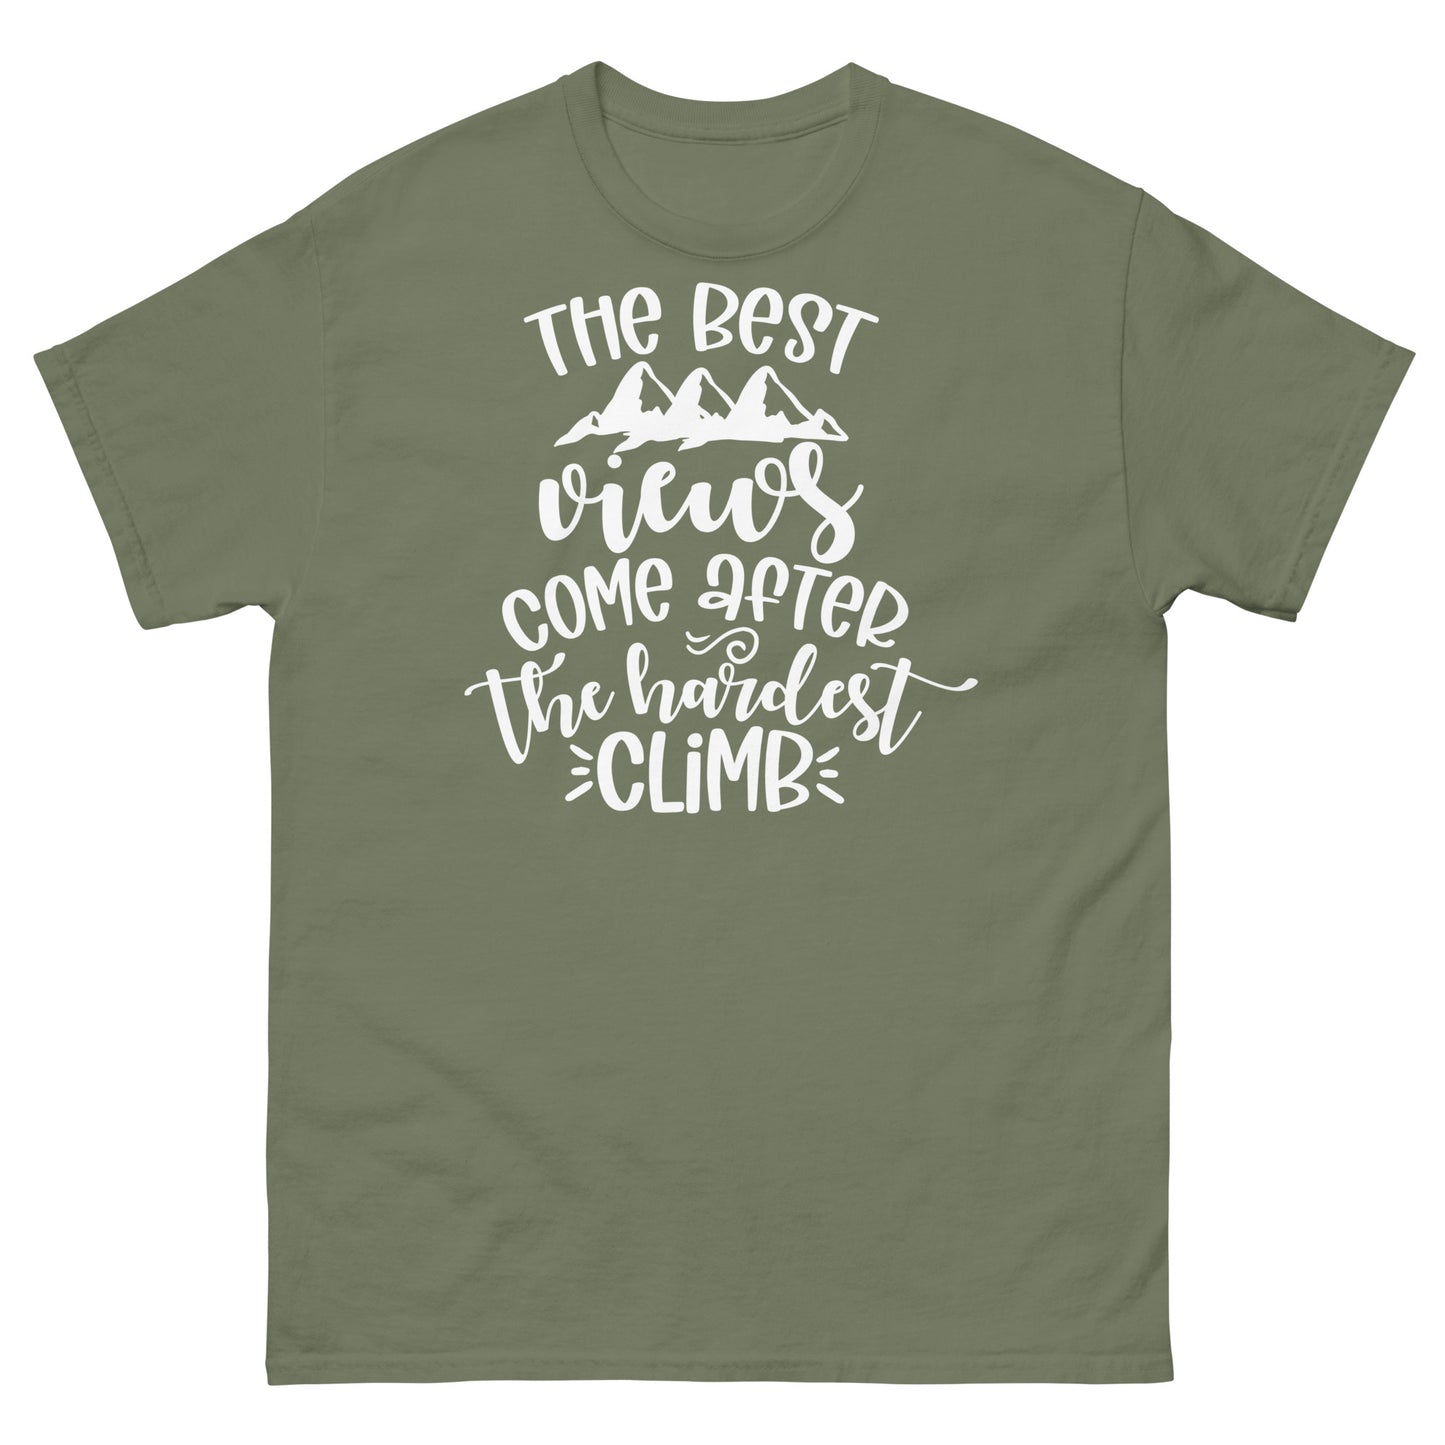 The best views come after the climb - classic tee